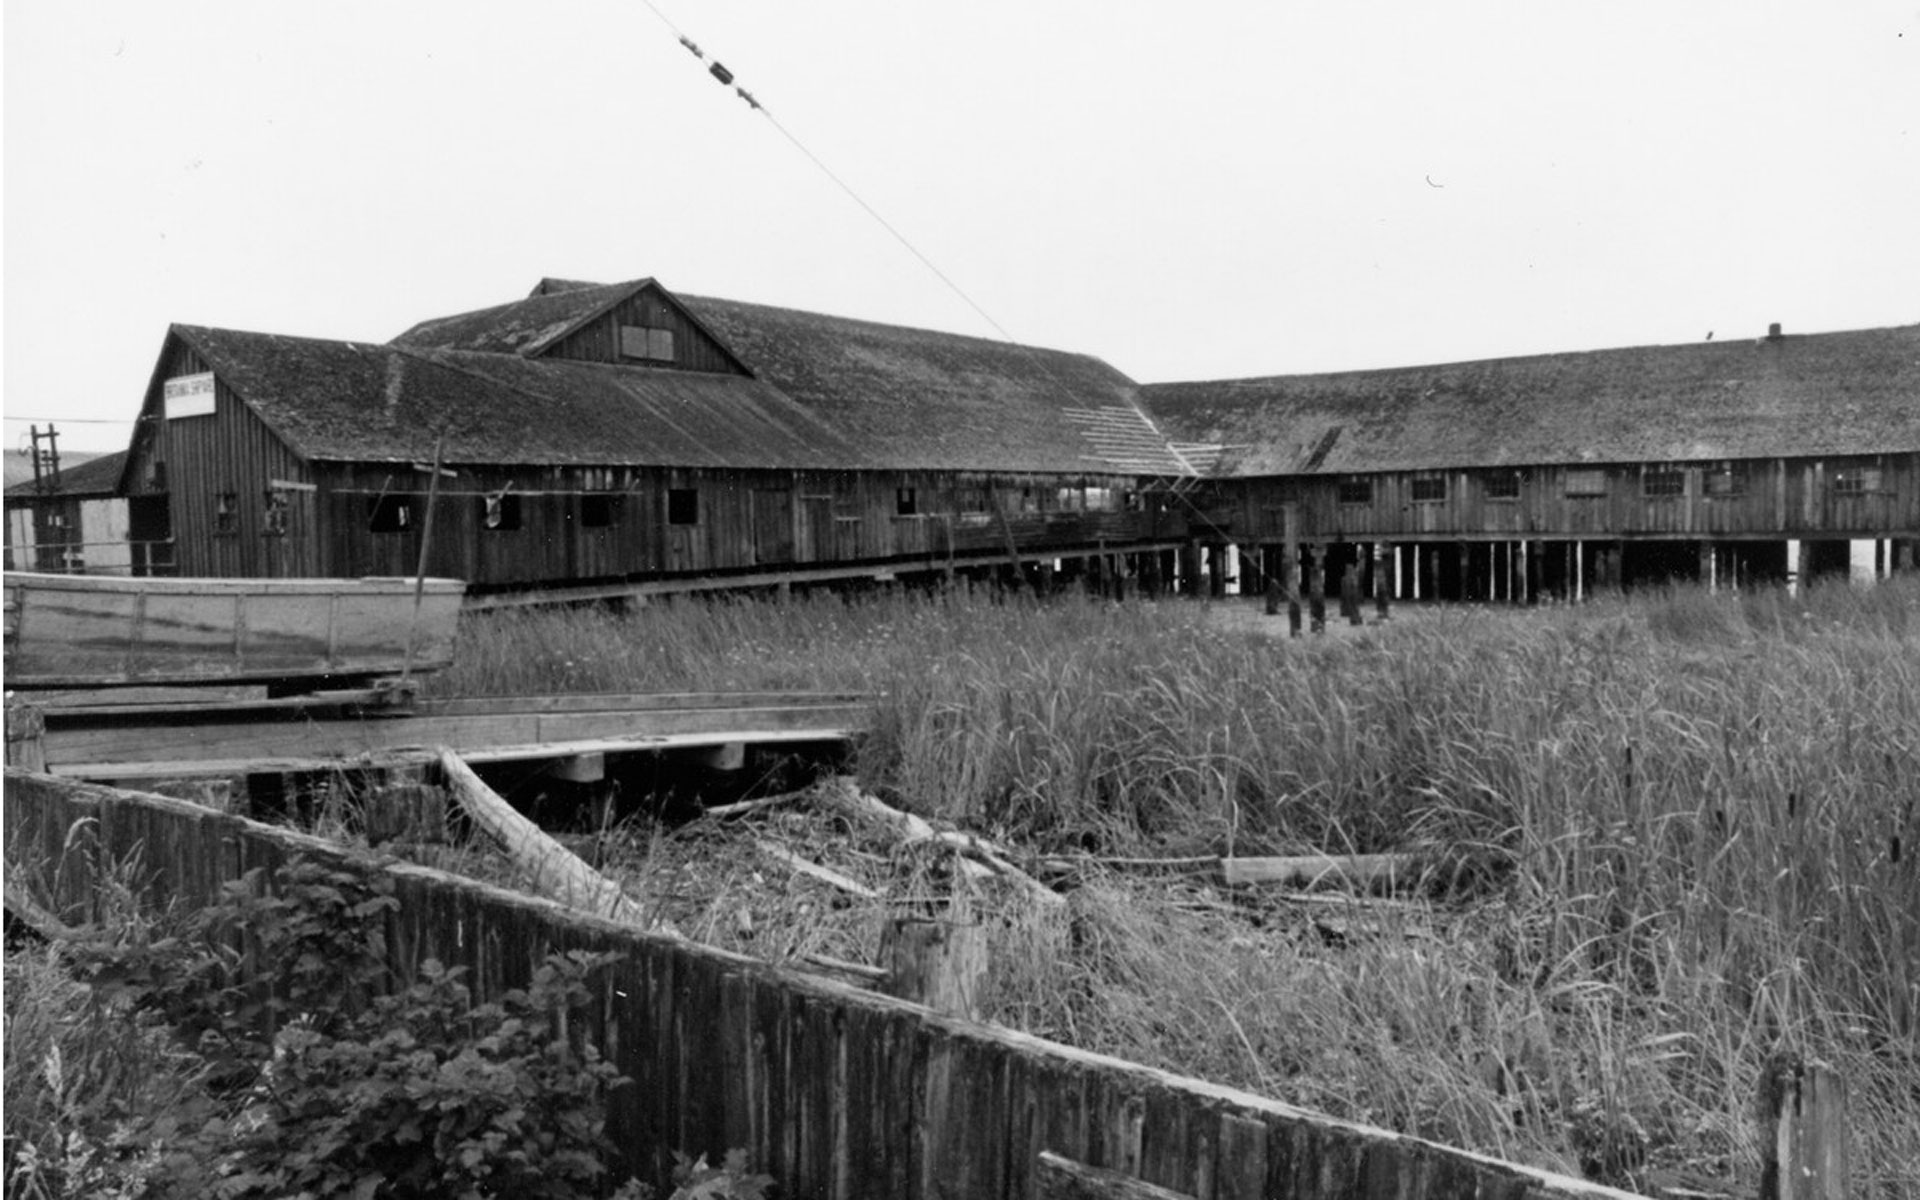 Britannia Shipyards buildings at low tide with grasses in the foreground.